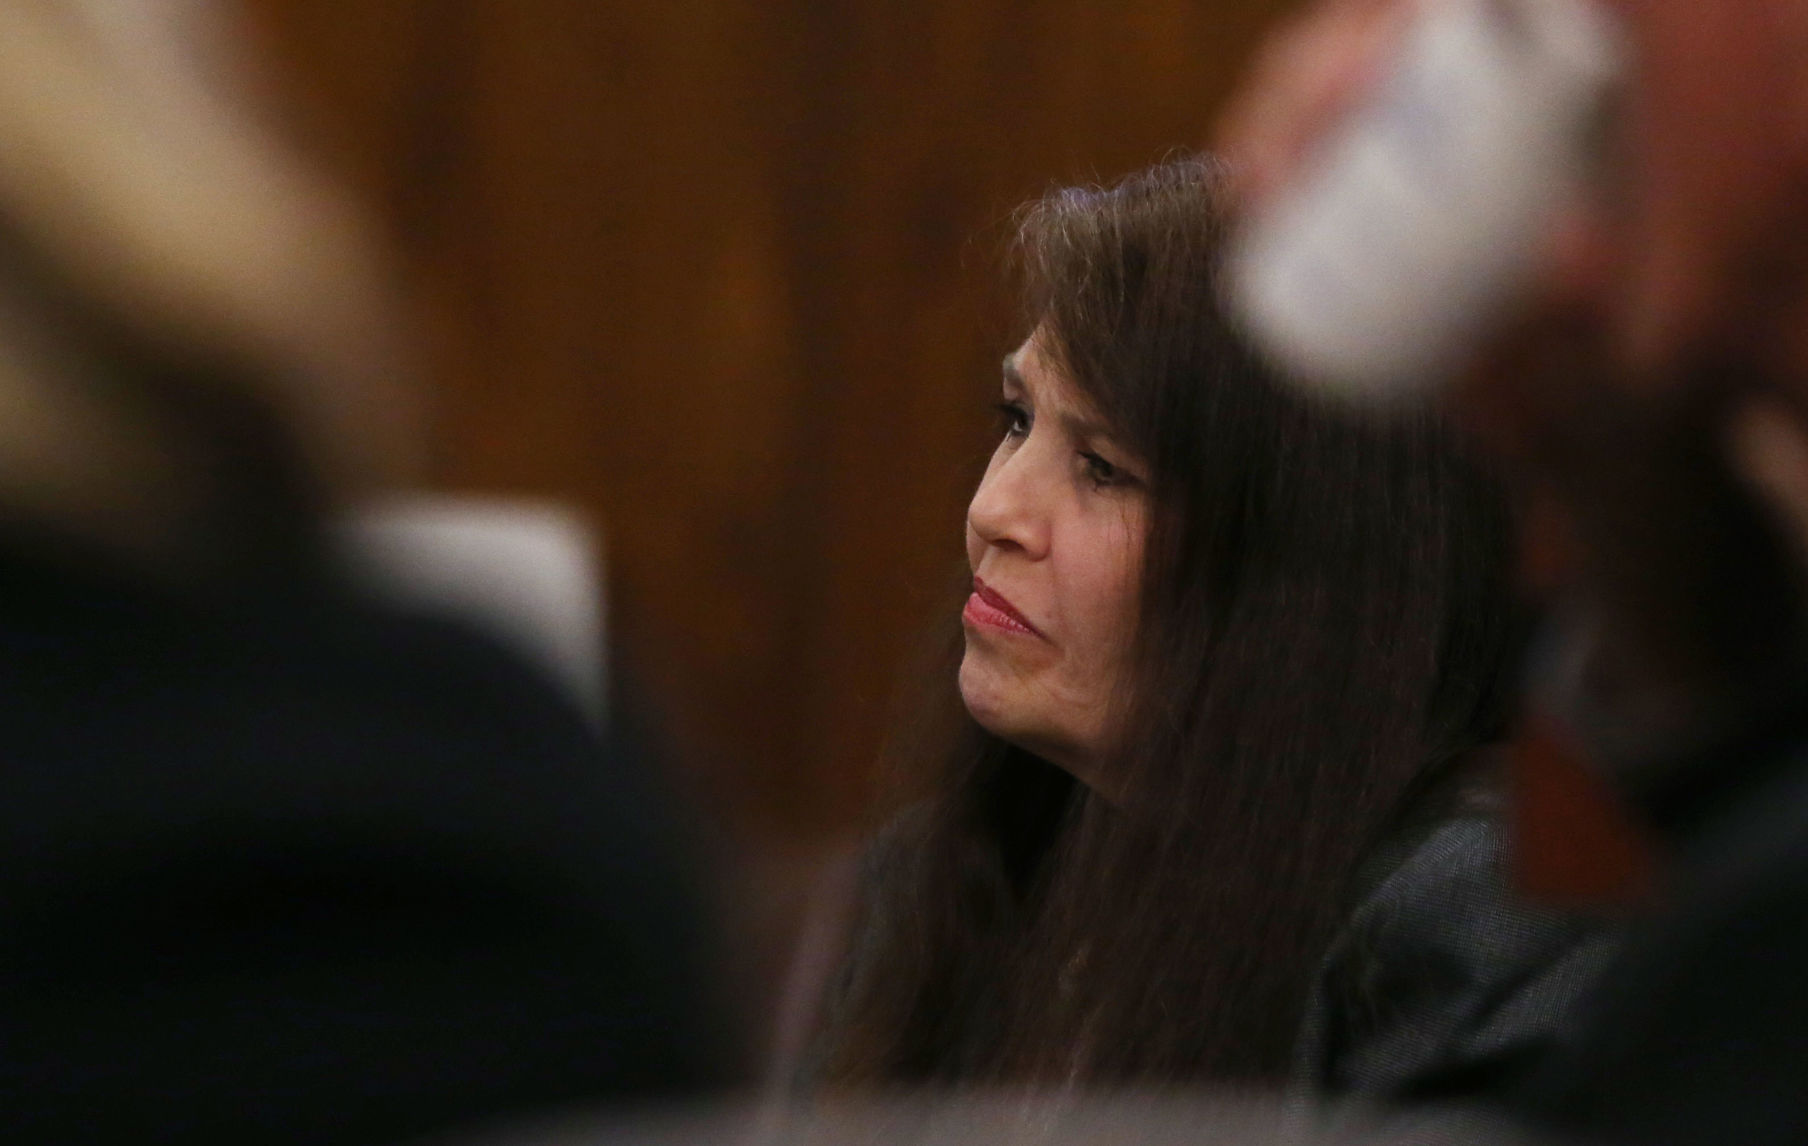 Leslie Chance takes witness stand as testimony winds down in her murder trial Breaking bakersfield image